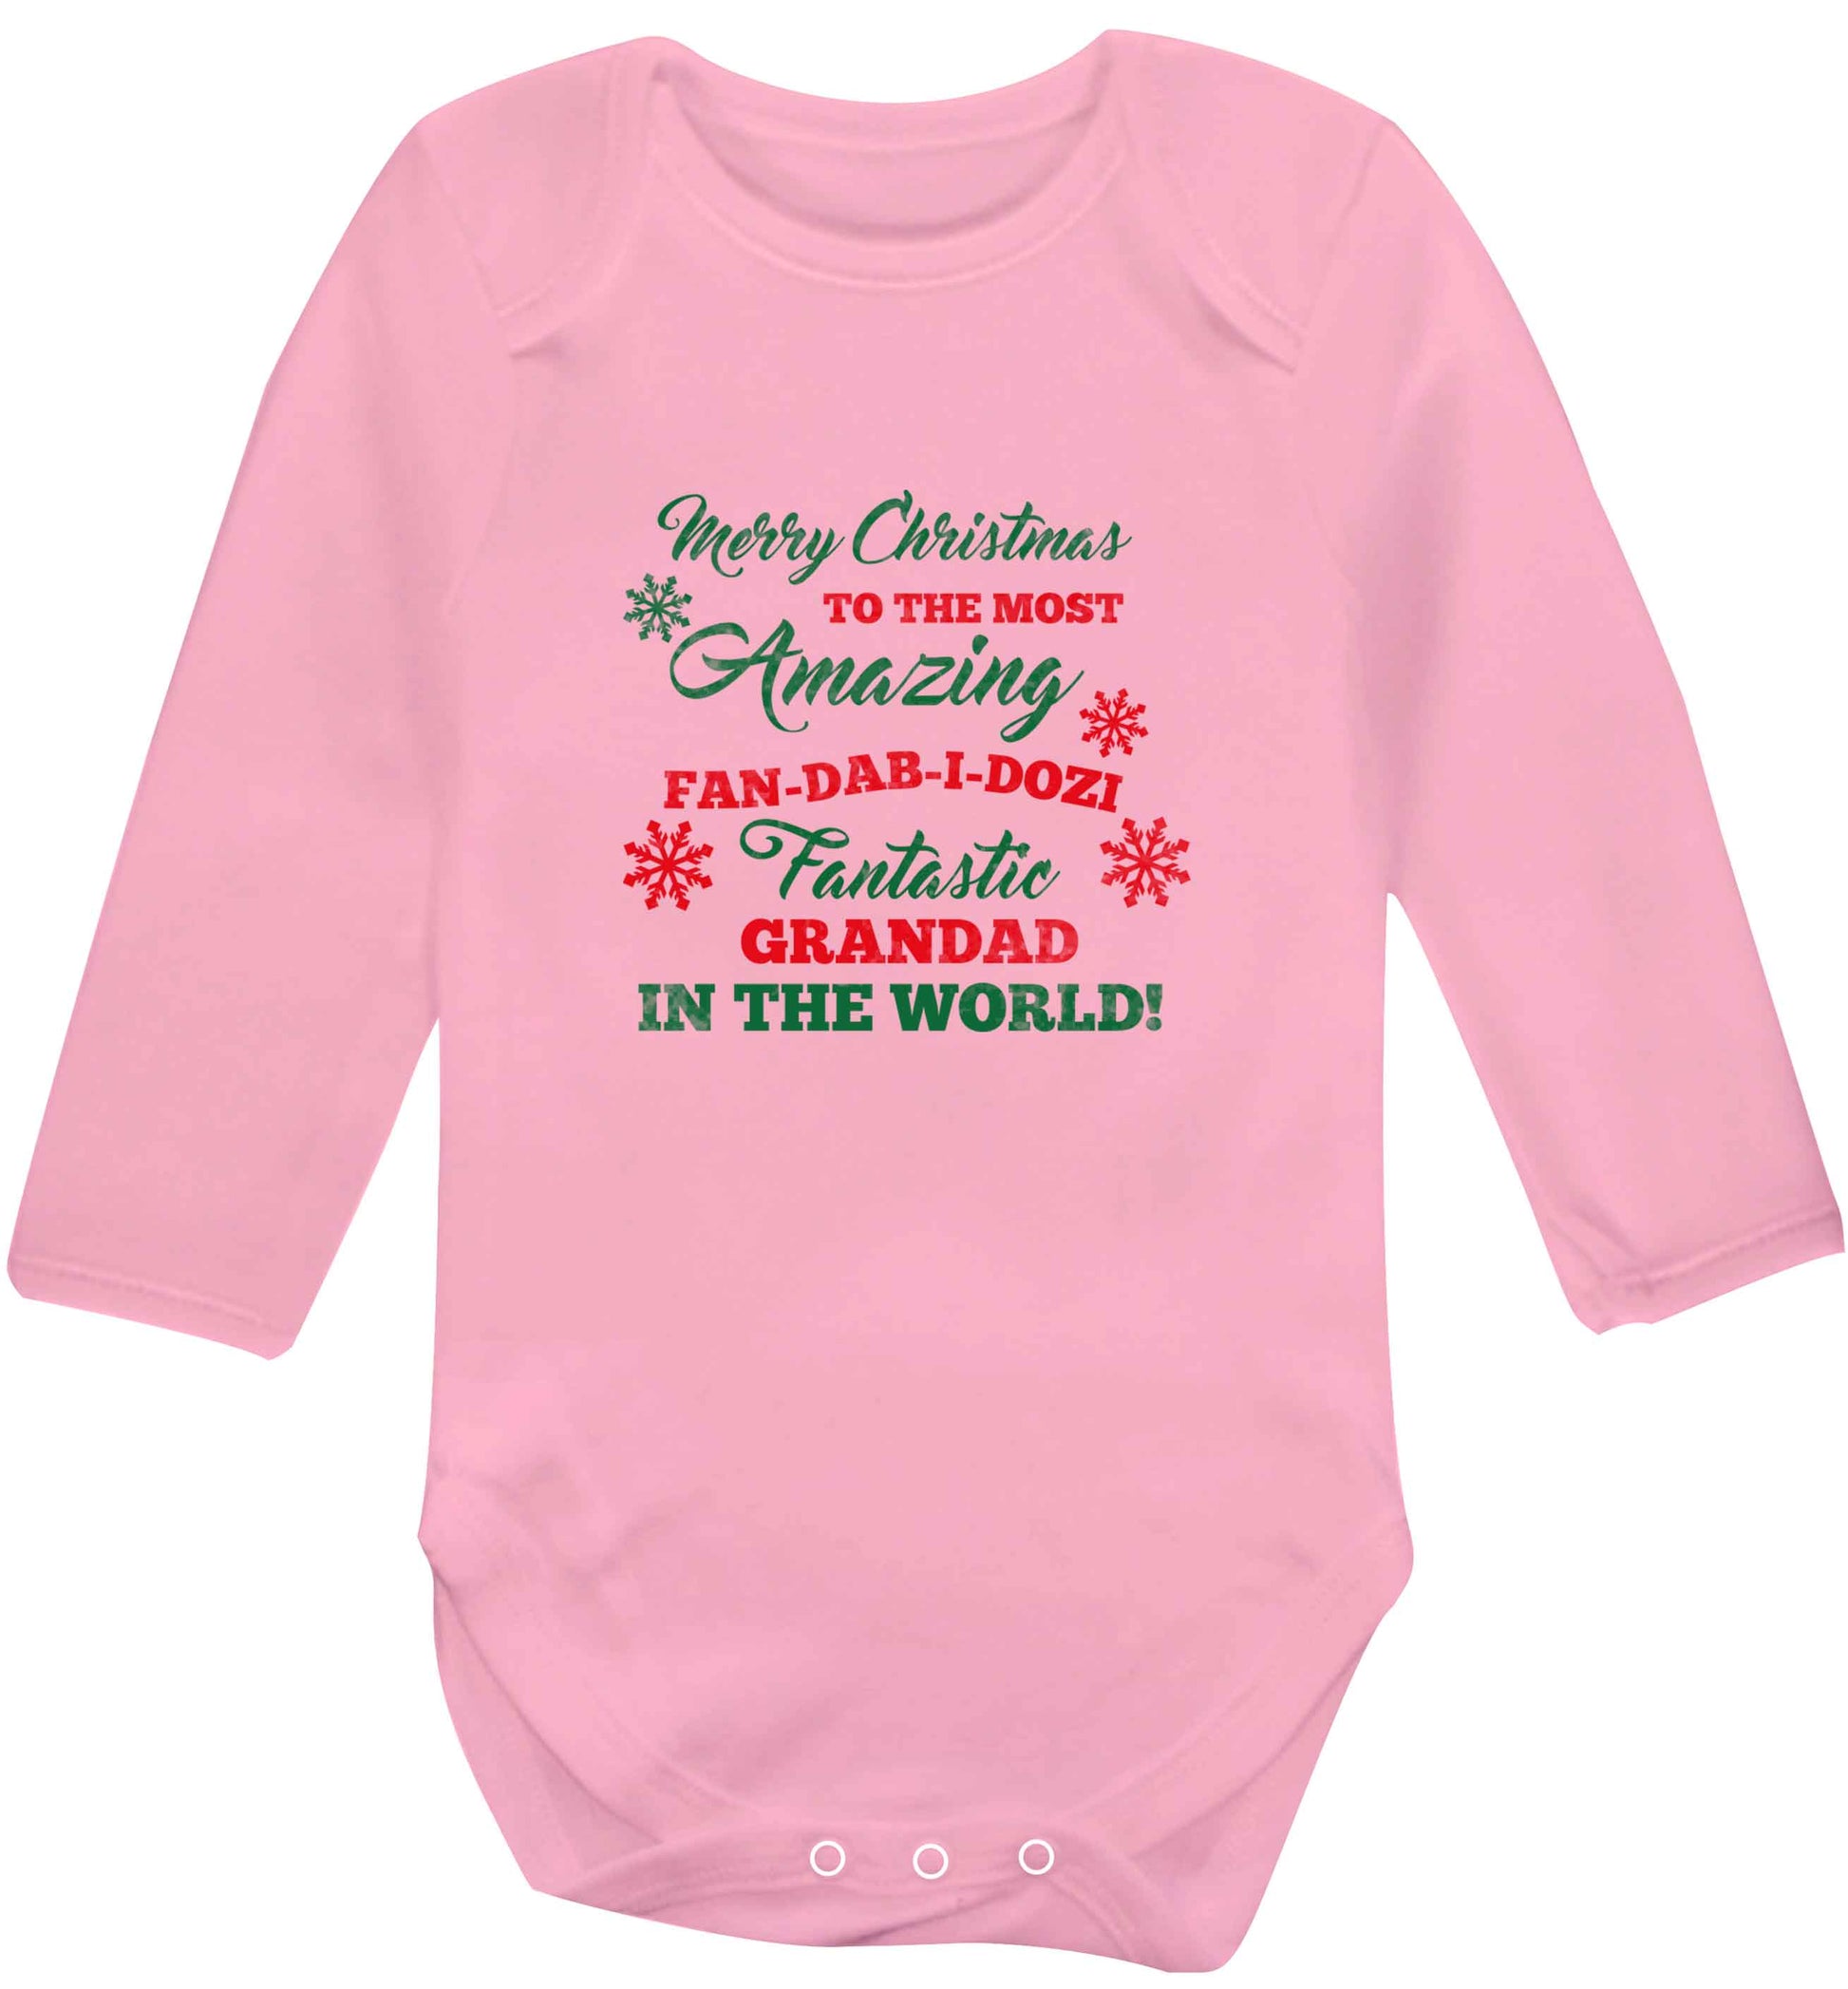 Merry Christmas to the most amazing fan-dab-i-dozi fantasic Grandad in the world baby vest long sleeved pale pink 6-12 months